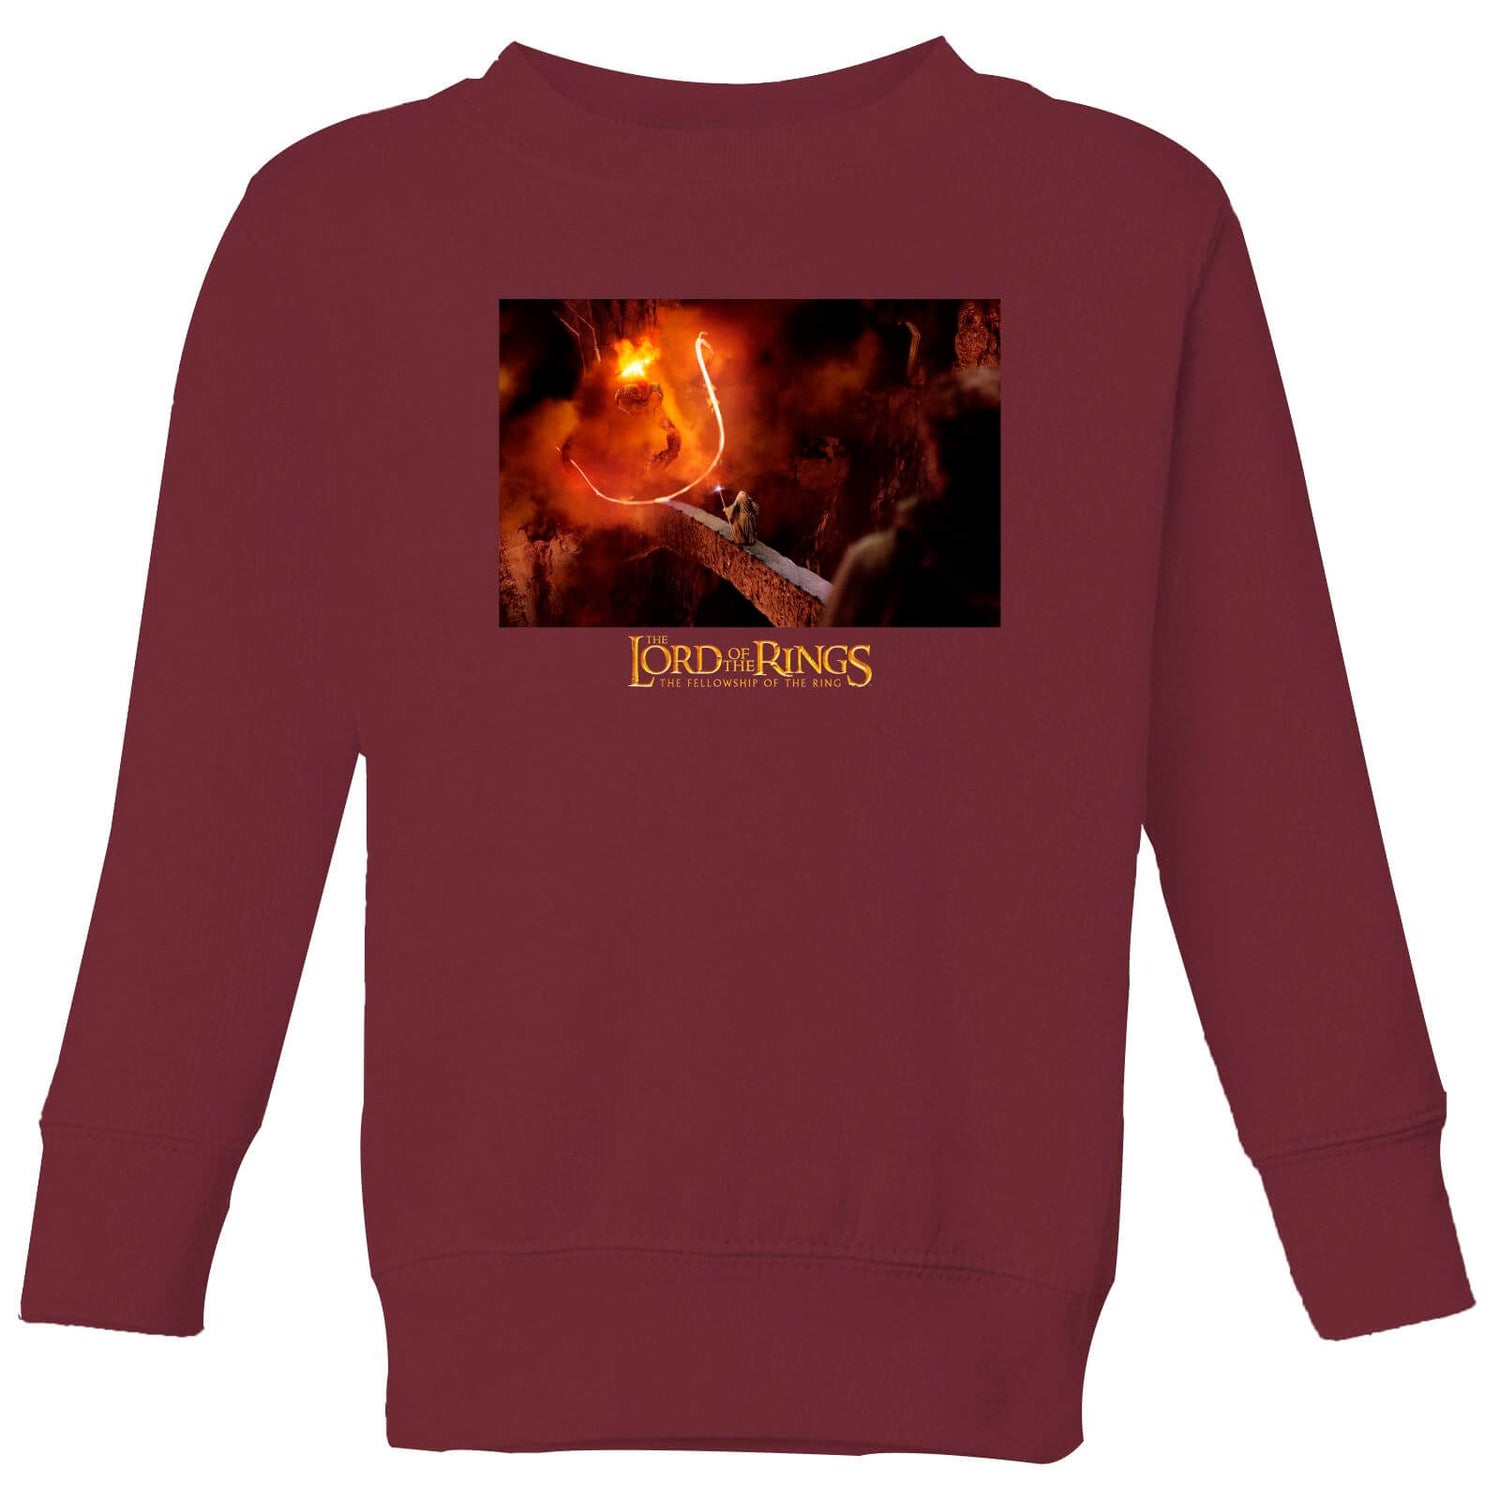 Lord Of The Rings You Shall Not Pass Kids' Sweatshirt - Burgundy